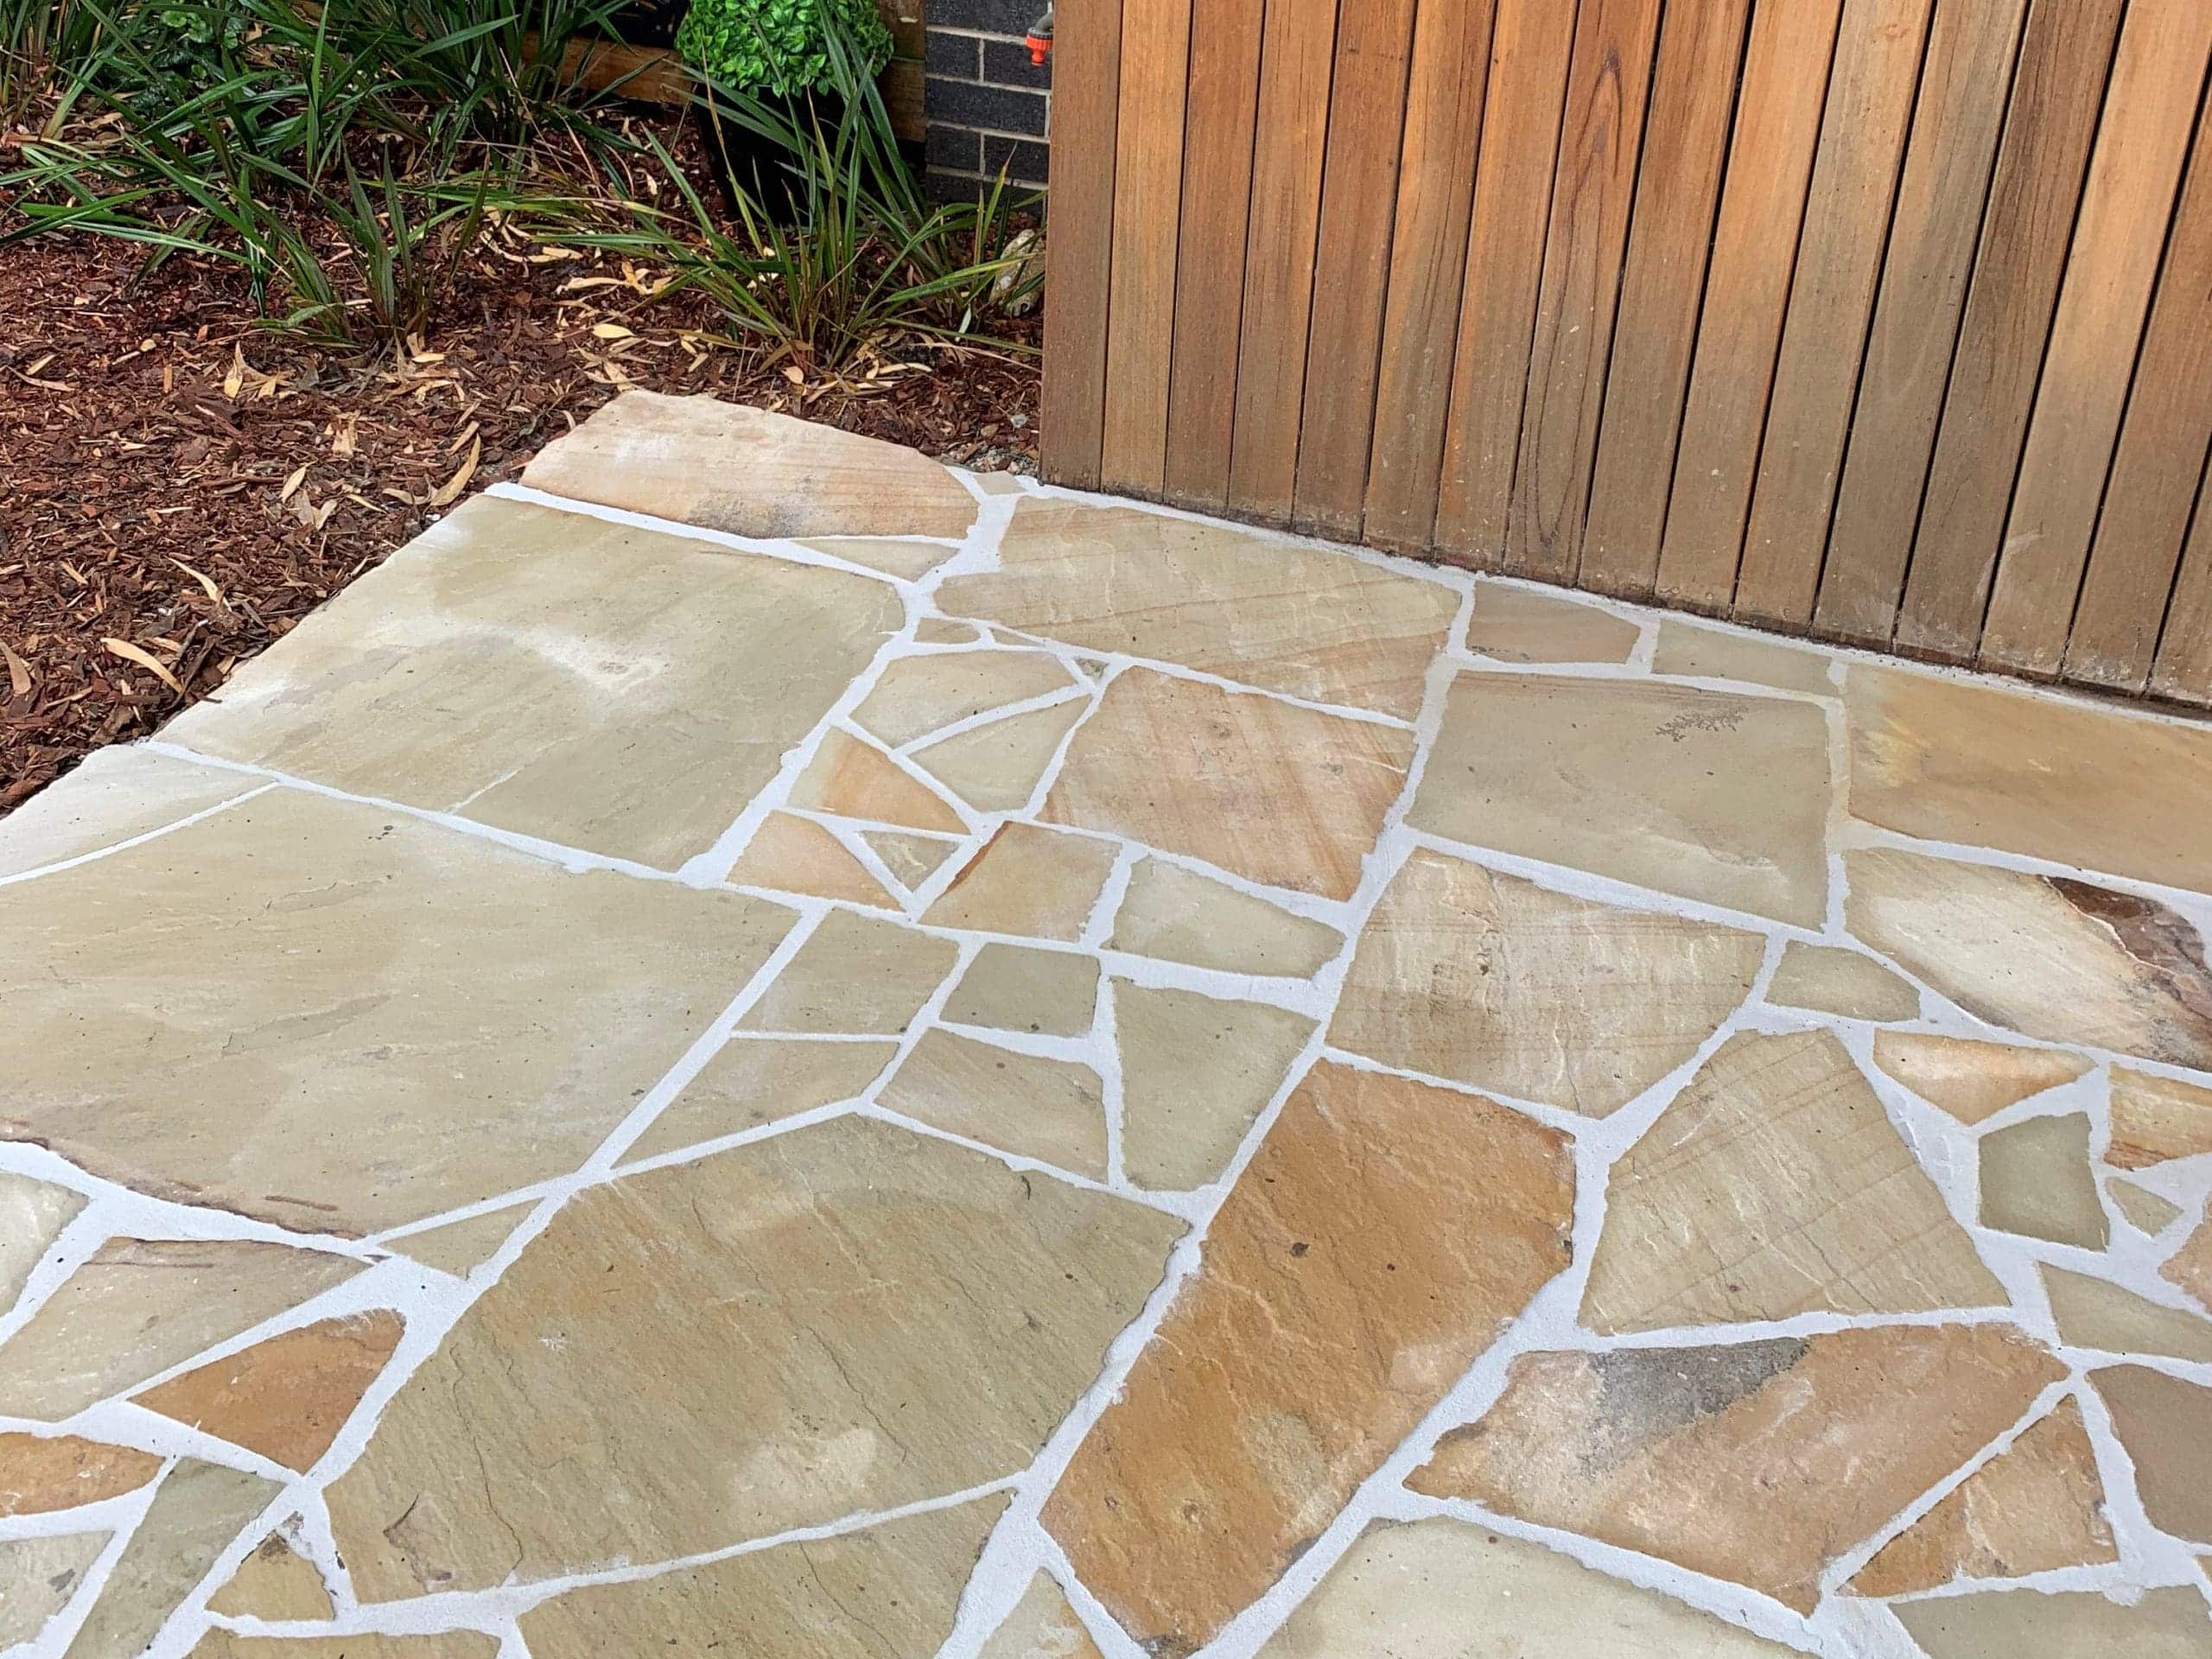 DESERT SAND SANDSTONE CRAZY PAVING_RMS TRADERS_NATURAL STONE PAVING FACADE PATHS SUPPLIER MELBOURNE (1)XX